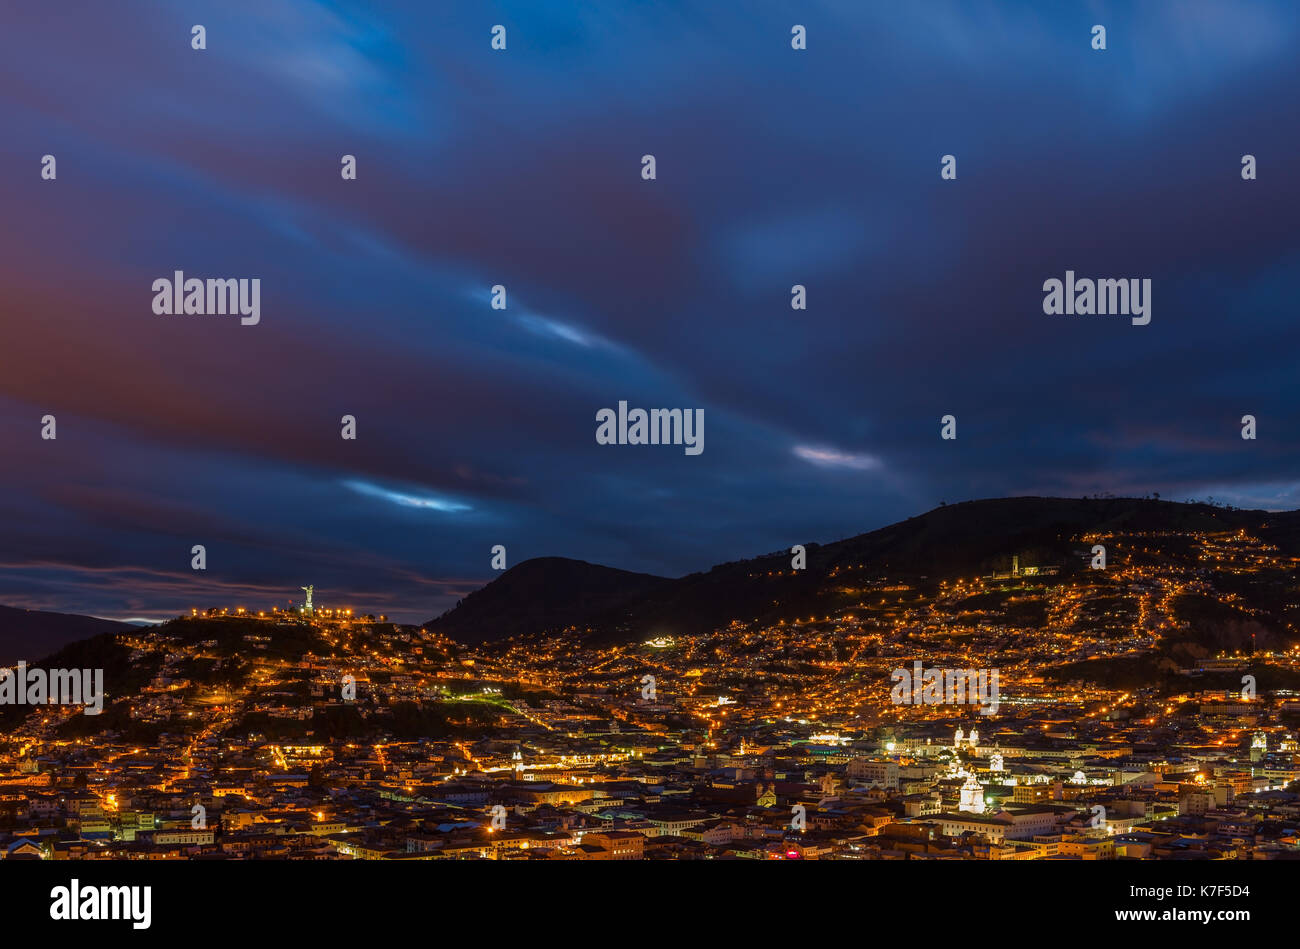 Cityscape of Quito with its illuminated historic city center during the blue hour, Ecuador. Stock Photo